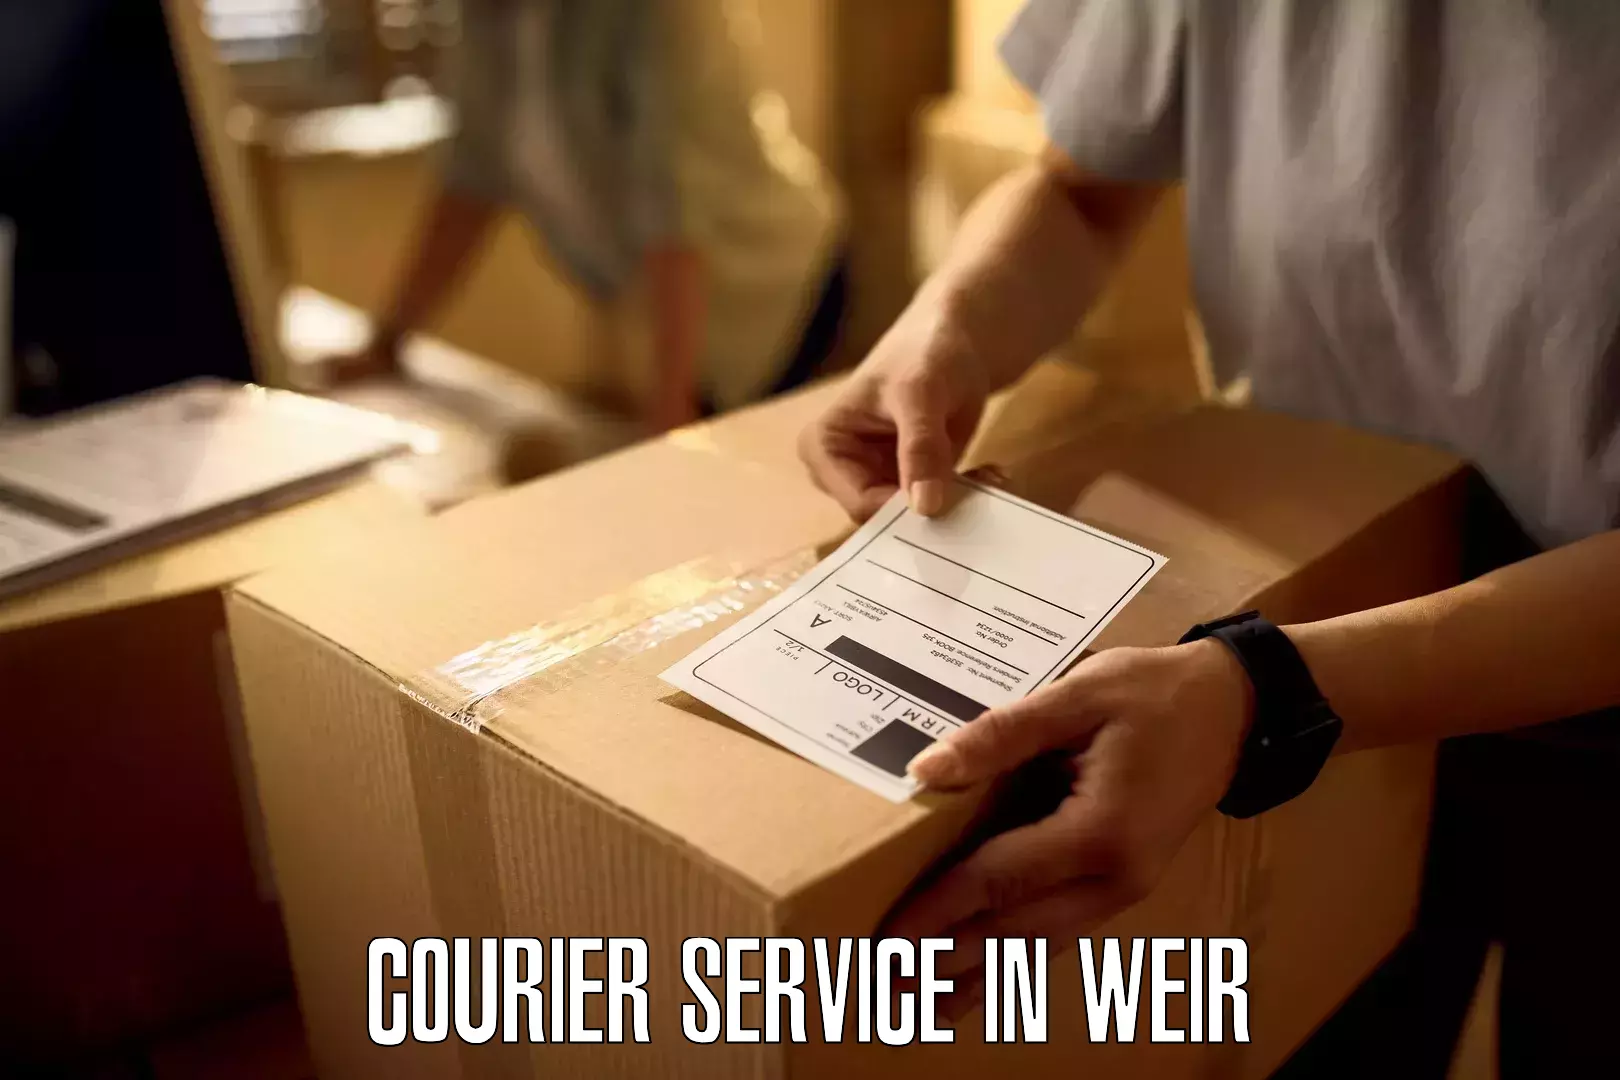 Express delivery capabilities in Weir